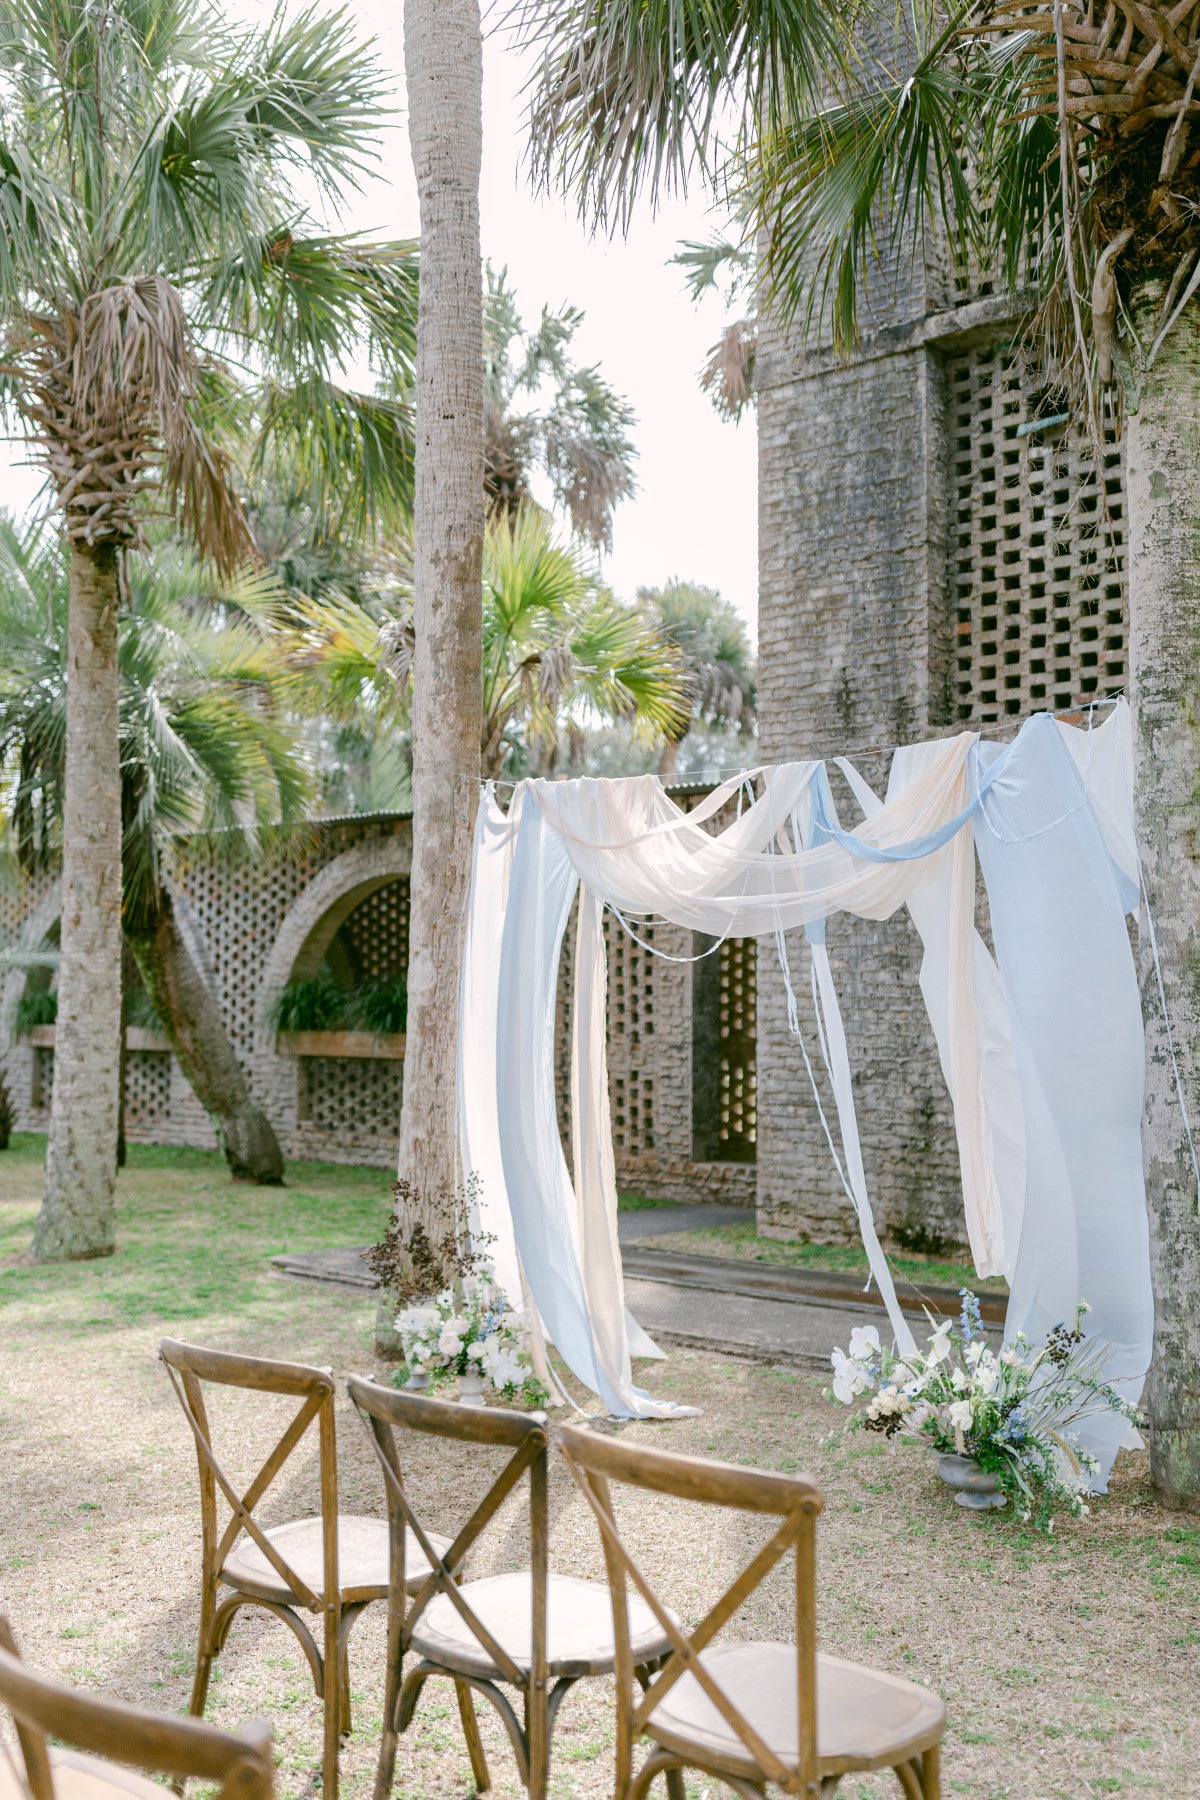 How To Put A Heavenly Yet Modern Twist On Your Castle Wedding